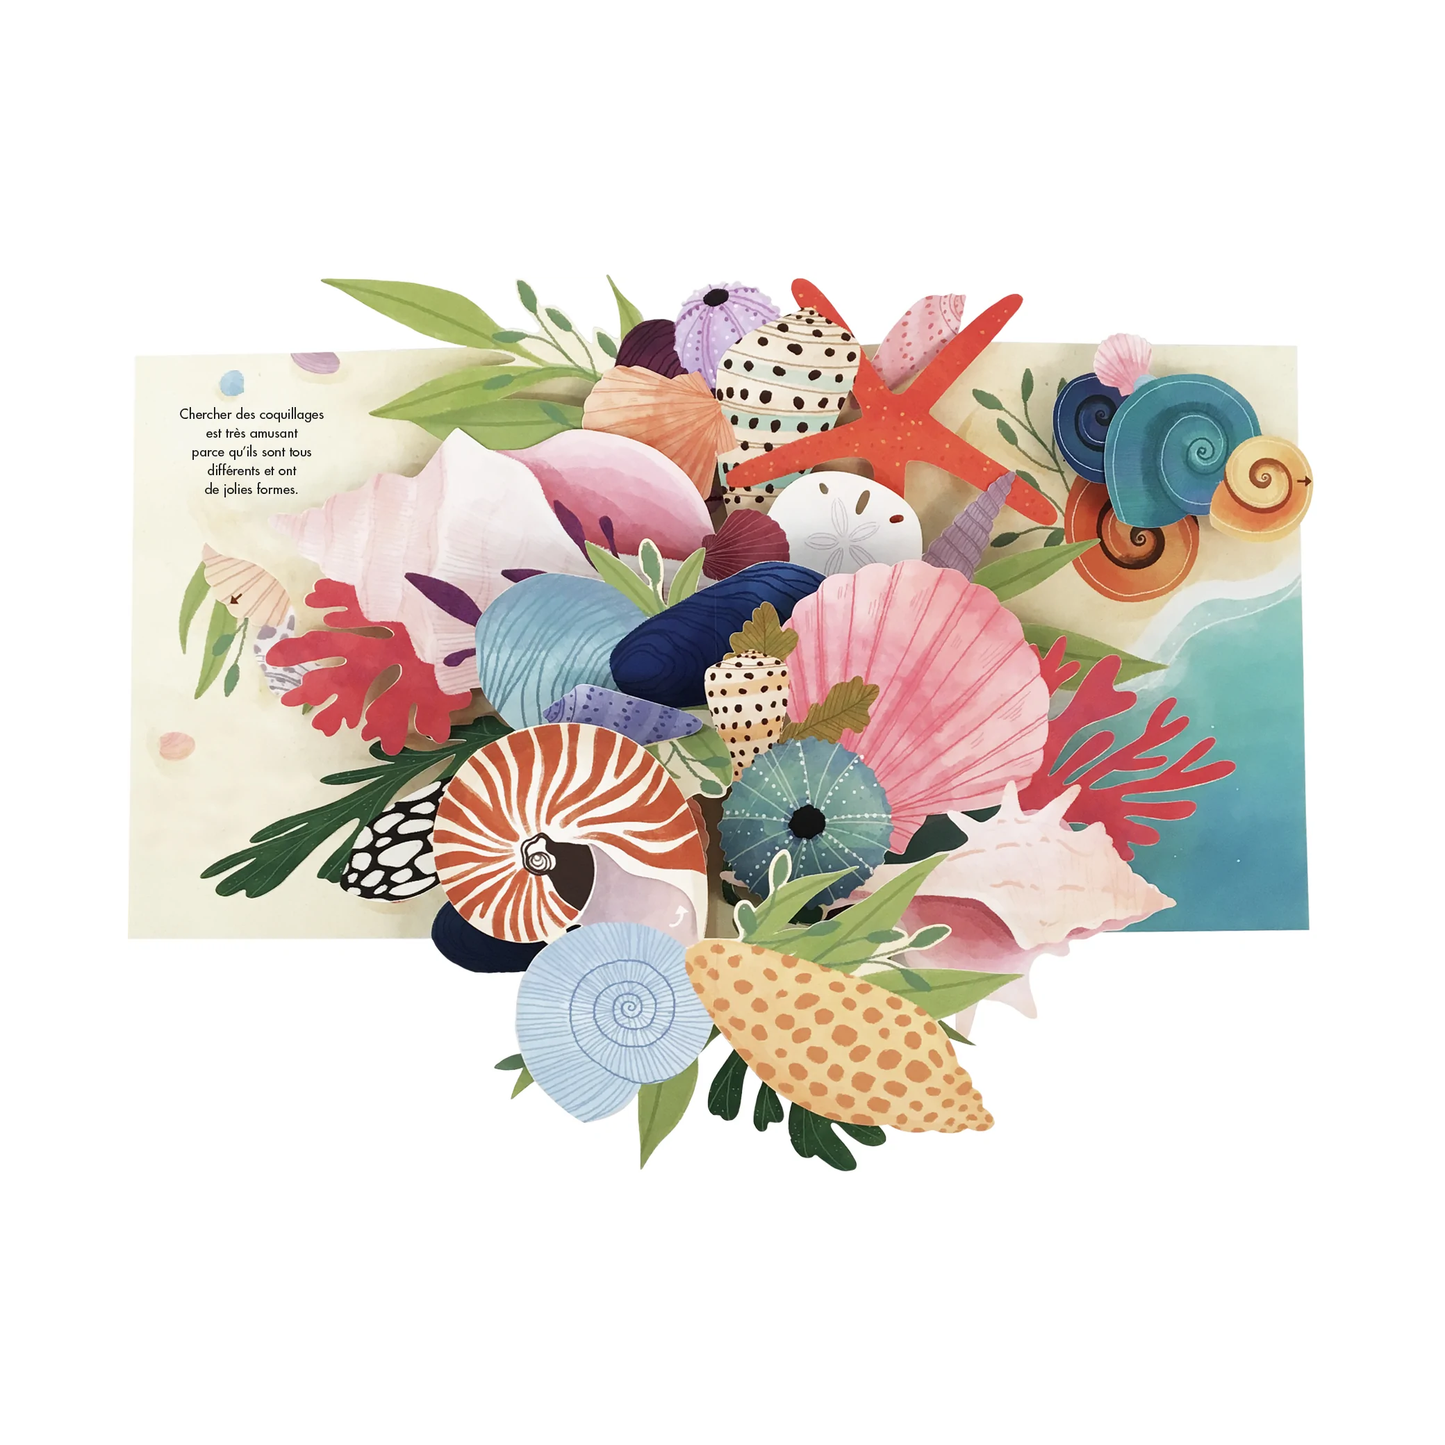 Treasures of the ocean - pop up book collection - Kimane